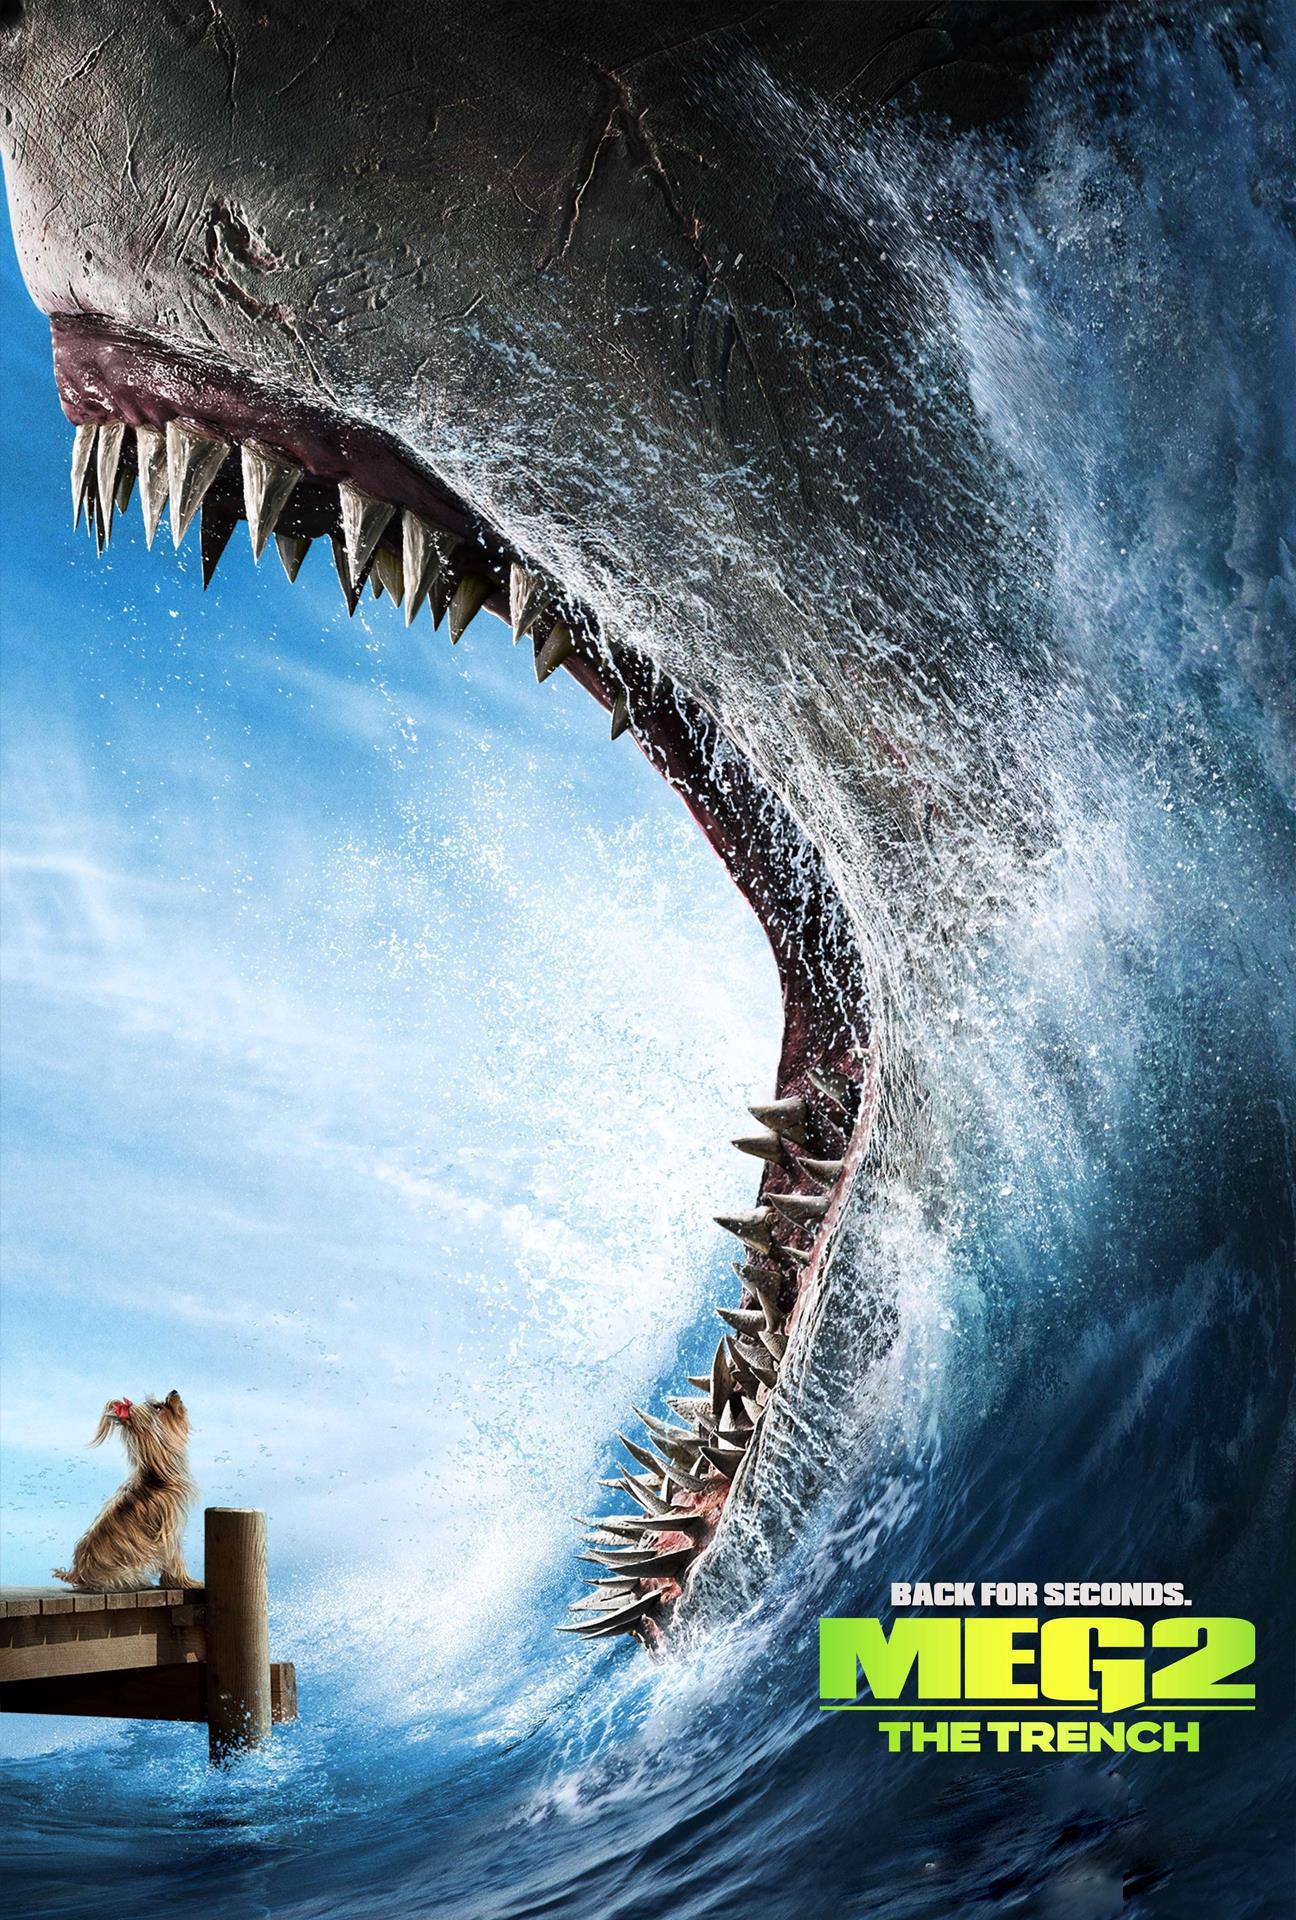 Movie Poster for Meg 2: The Trench